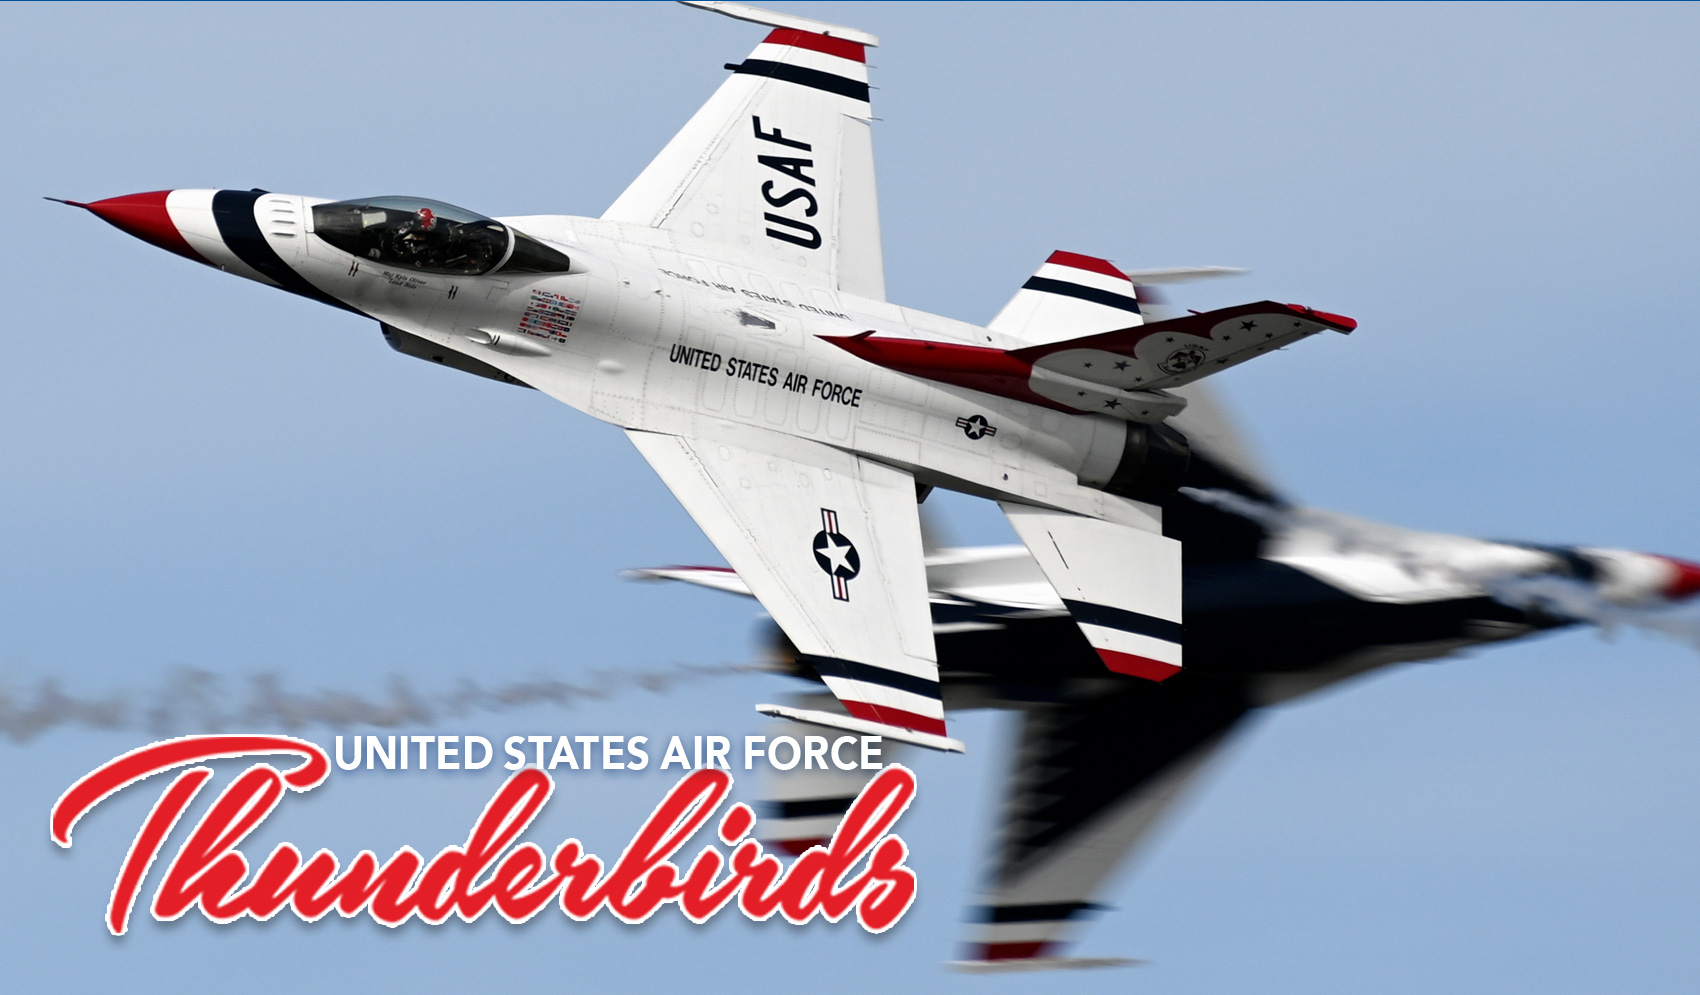 CenterPoint Energy Dayton Air Show Presented by Kroger. Featuring the United States Air Force Thunderbirds July 22-23, 2023 Dayton International Airport